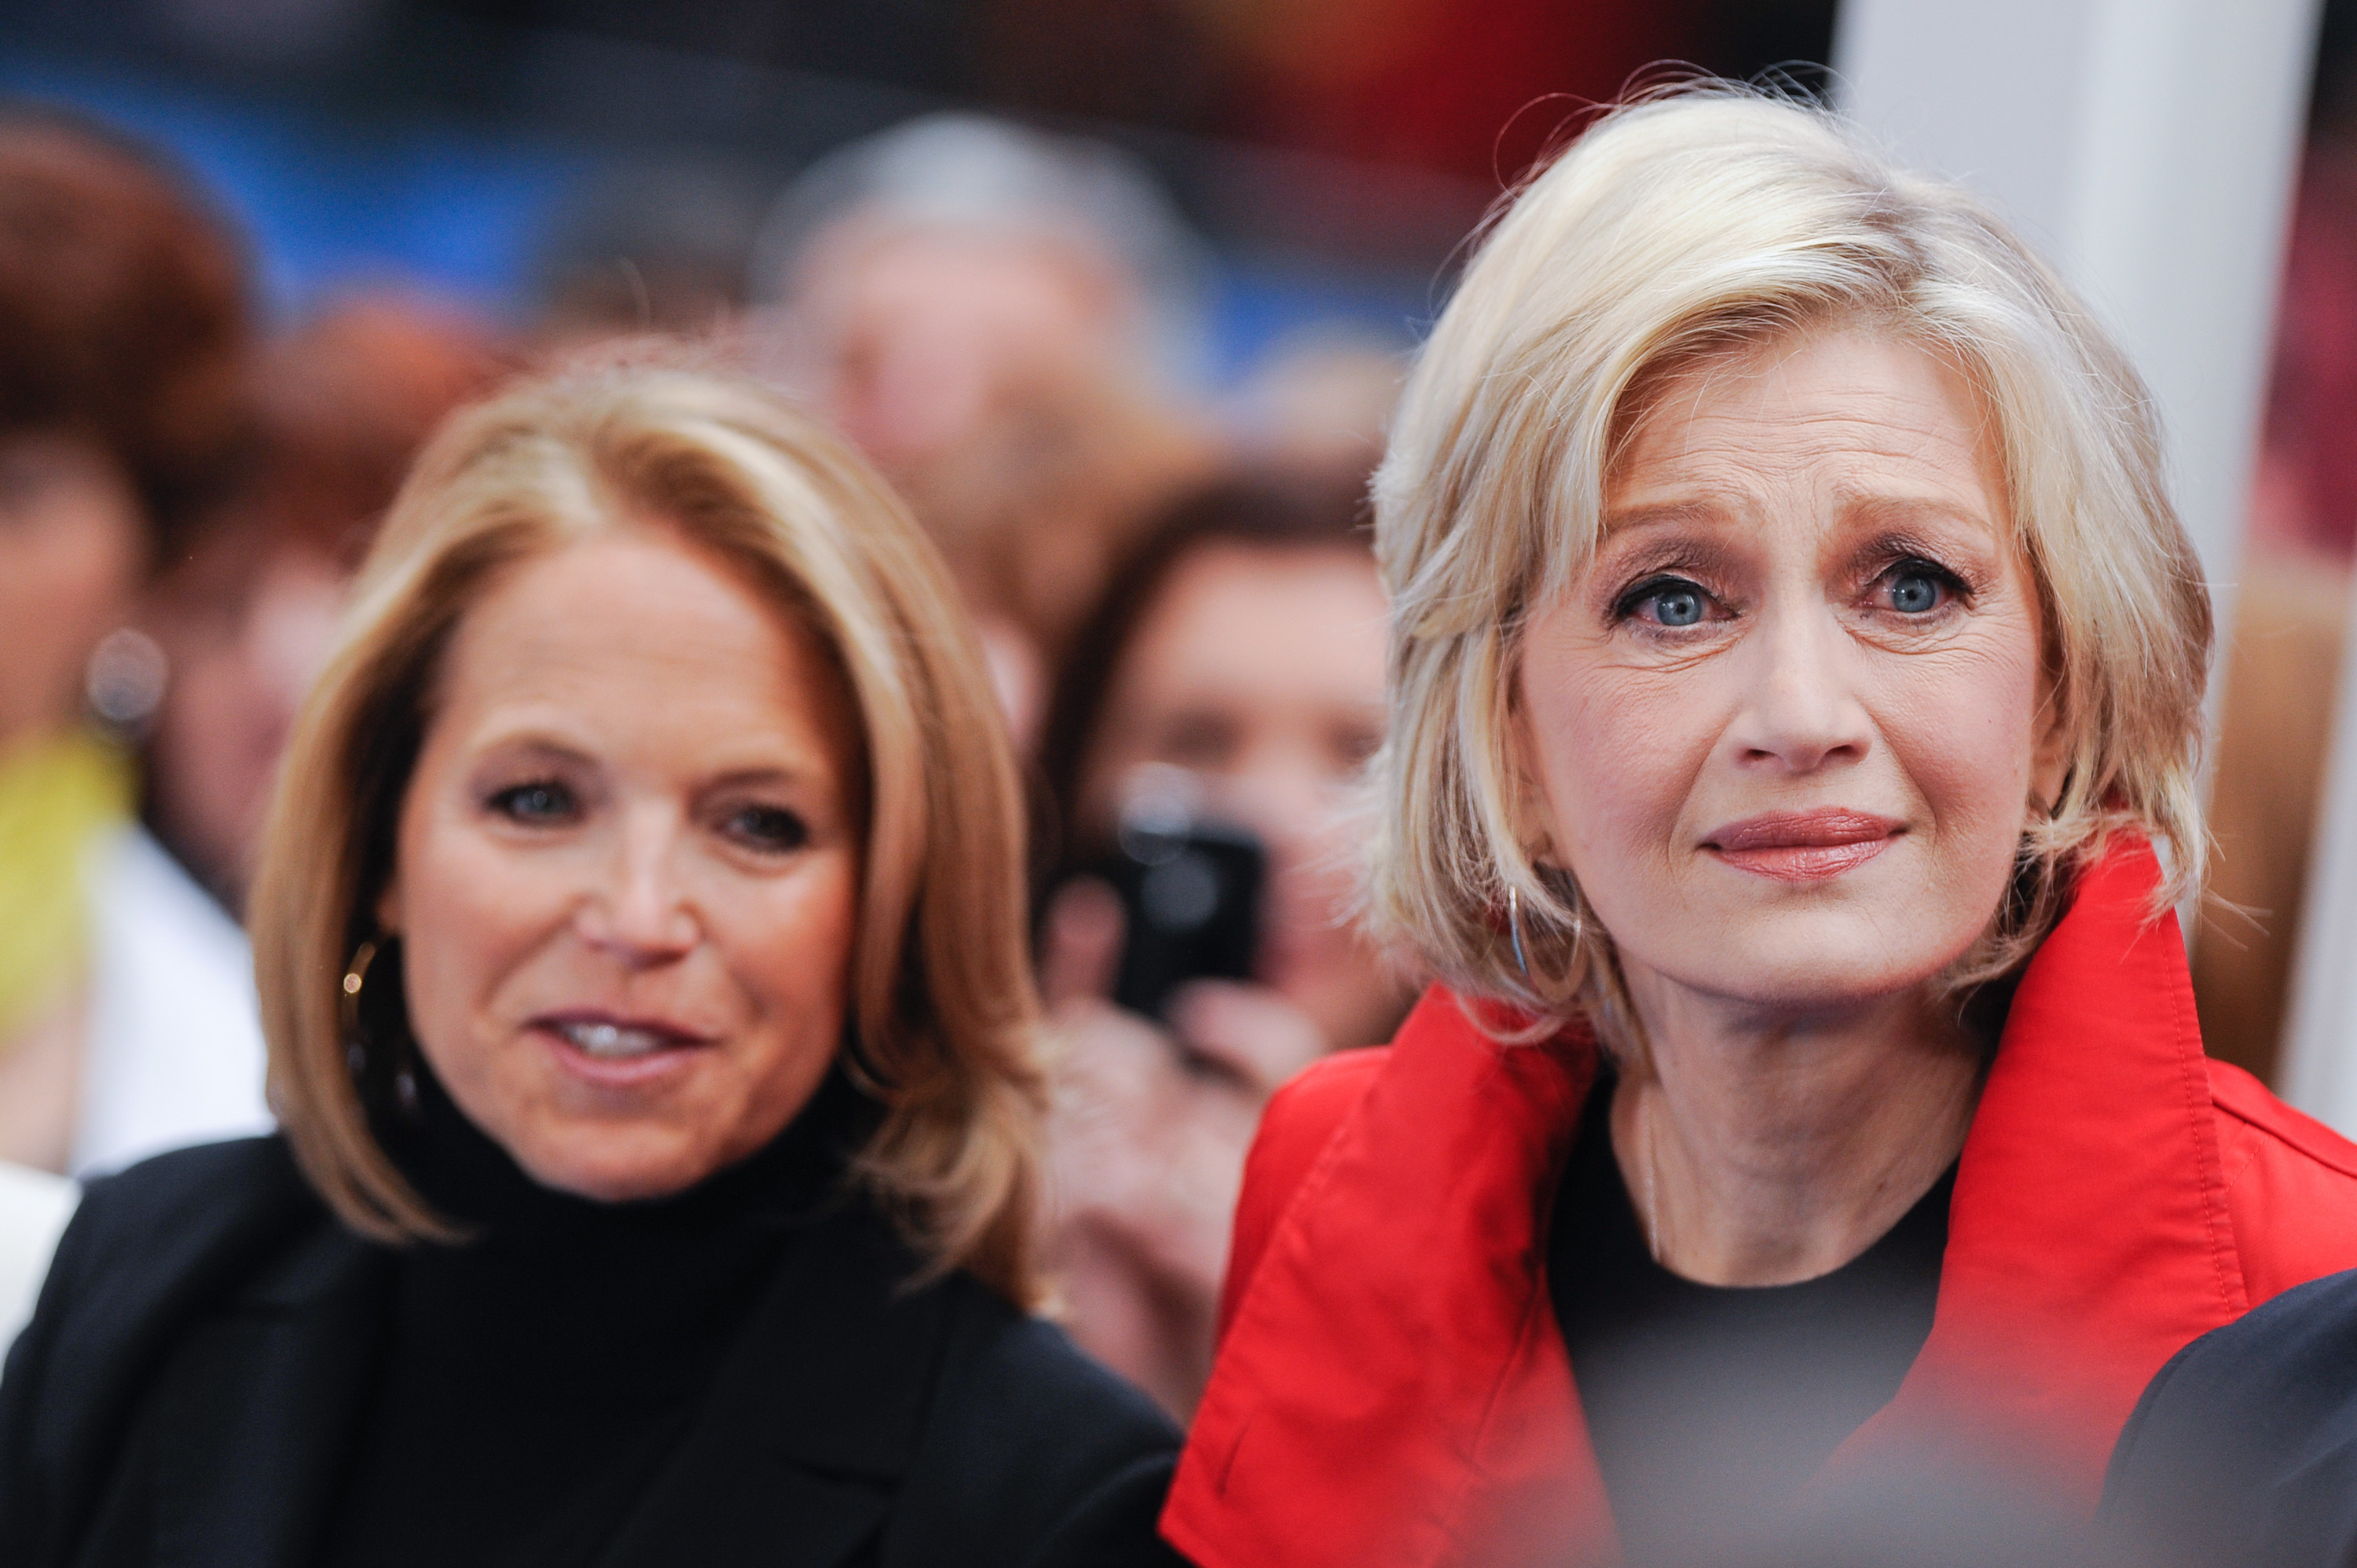 News reporters Katie Couric (L) and Diane Sawyer tape an interview at &quot;Good Morning America&quot; at the ABC Times Square Studios on October 3, 2011